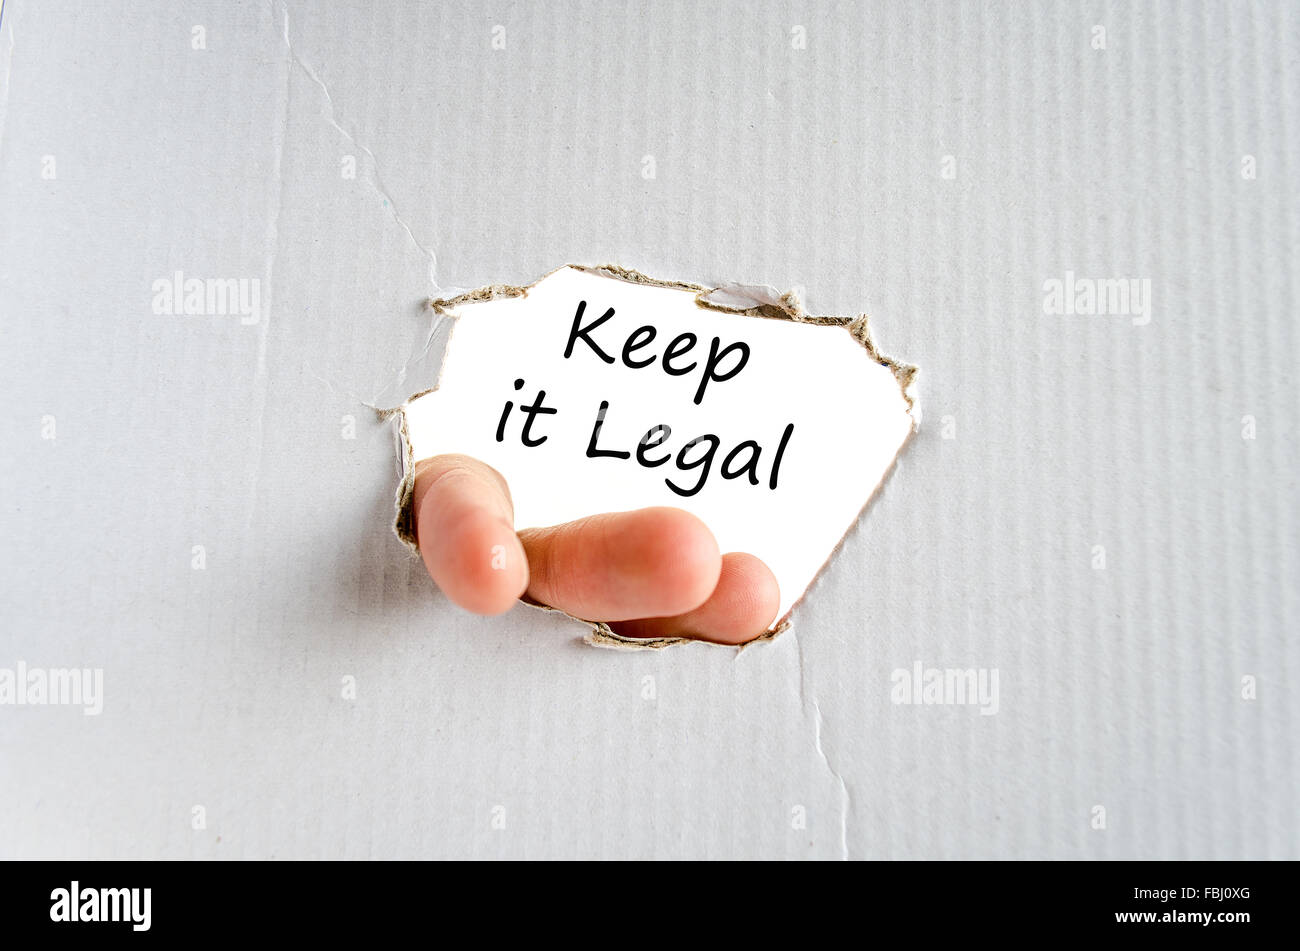 Keep it legal text concept isolated over white background Stock Photo